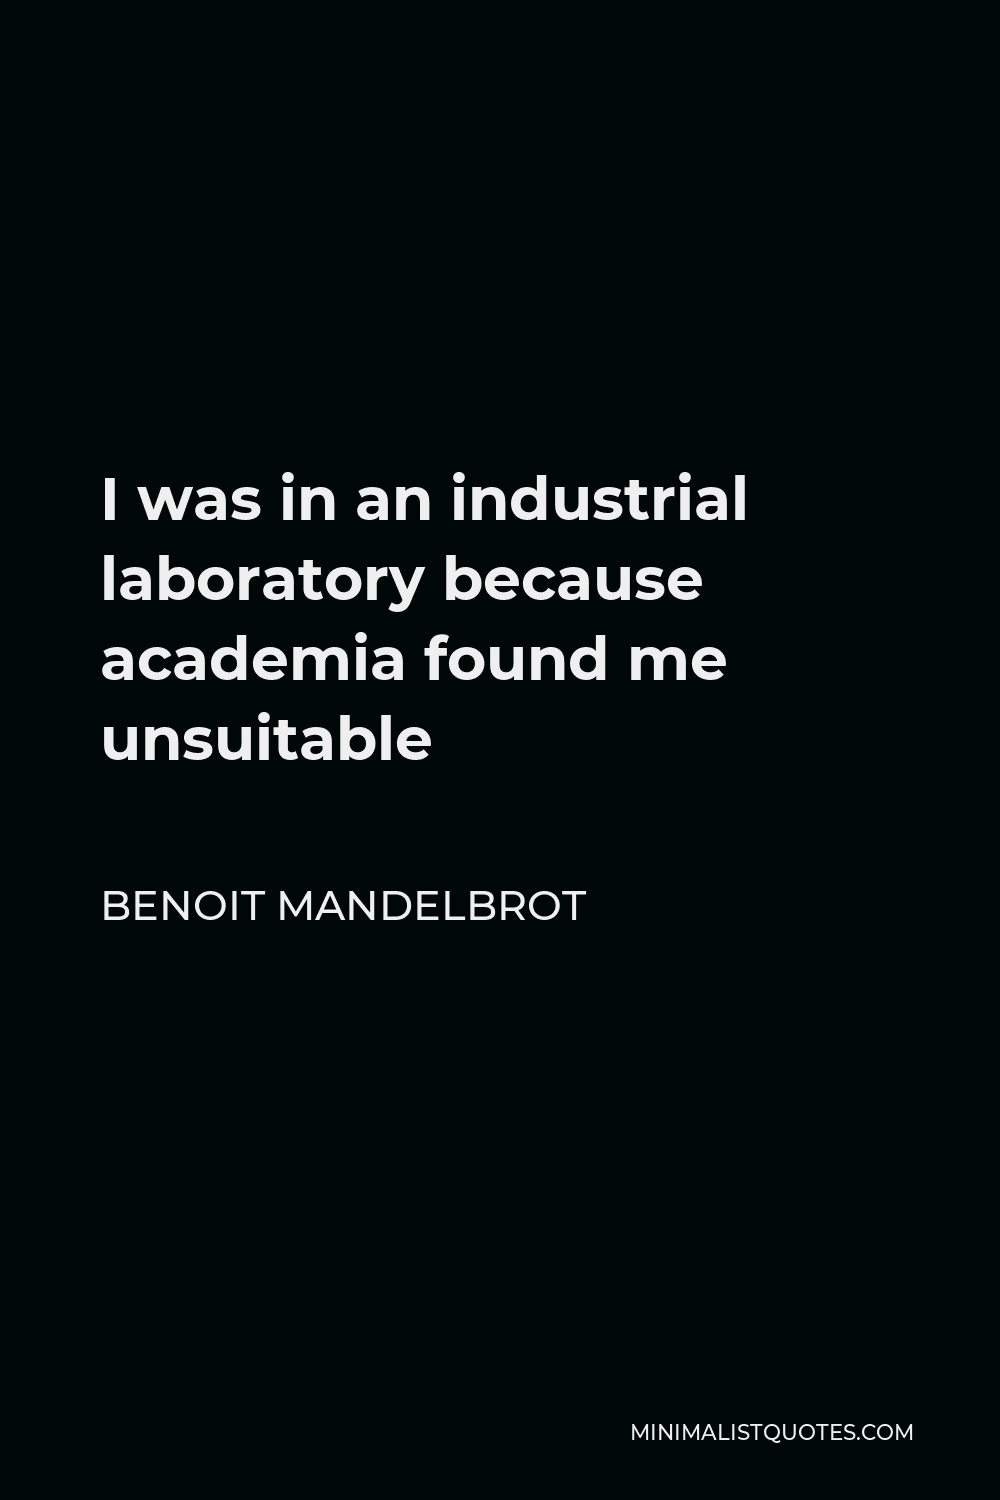 Benoit Mandelbrot Quote - I was in an industrial laboratory because academia found me unsuitable